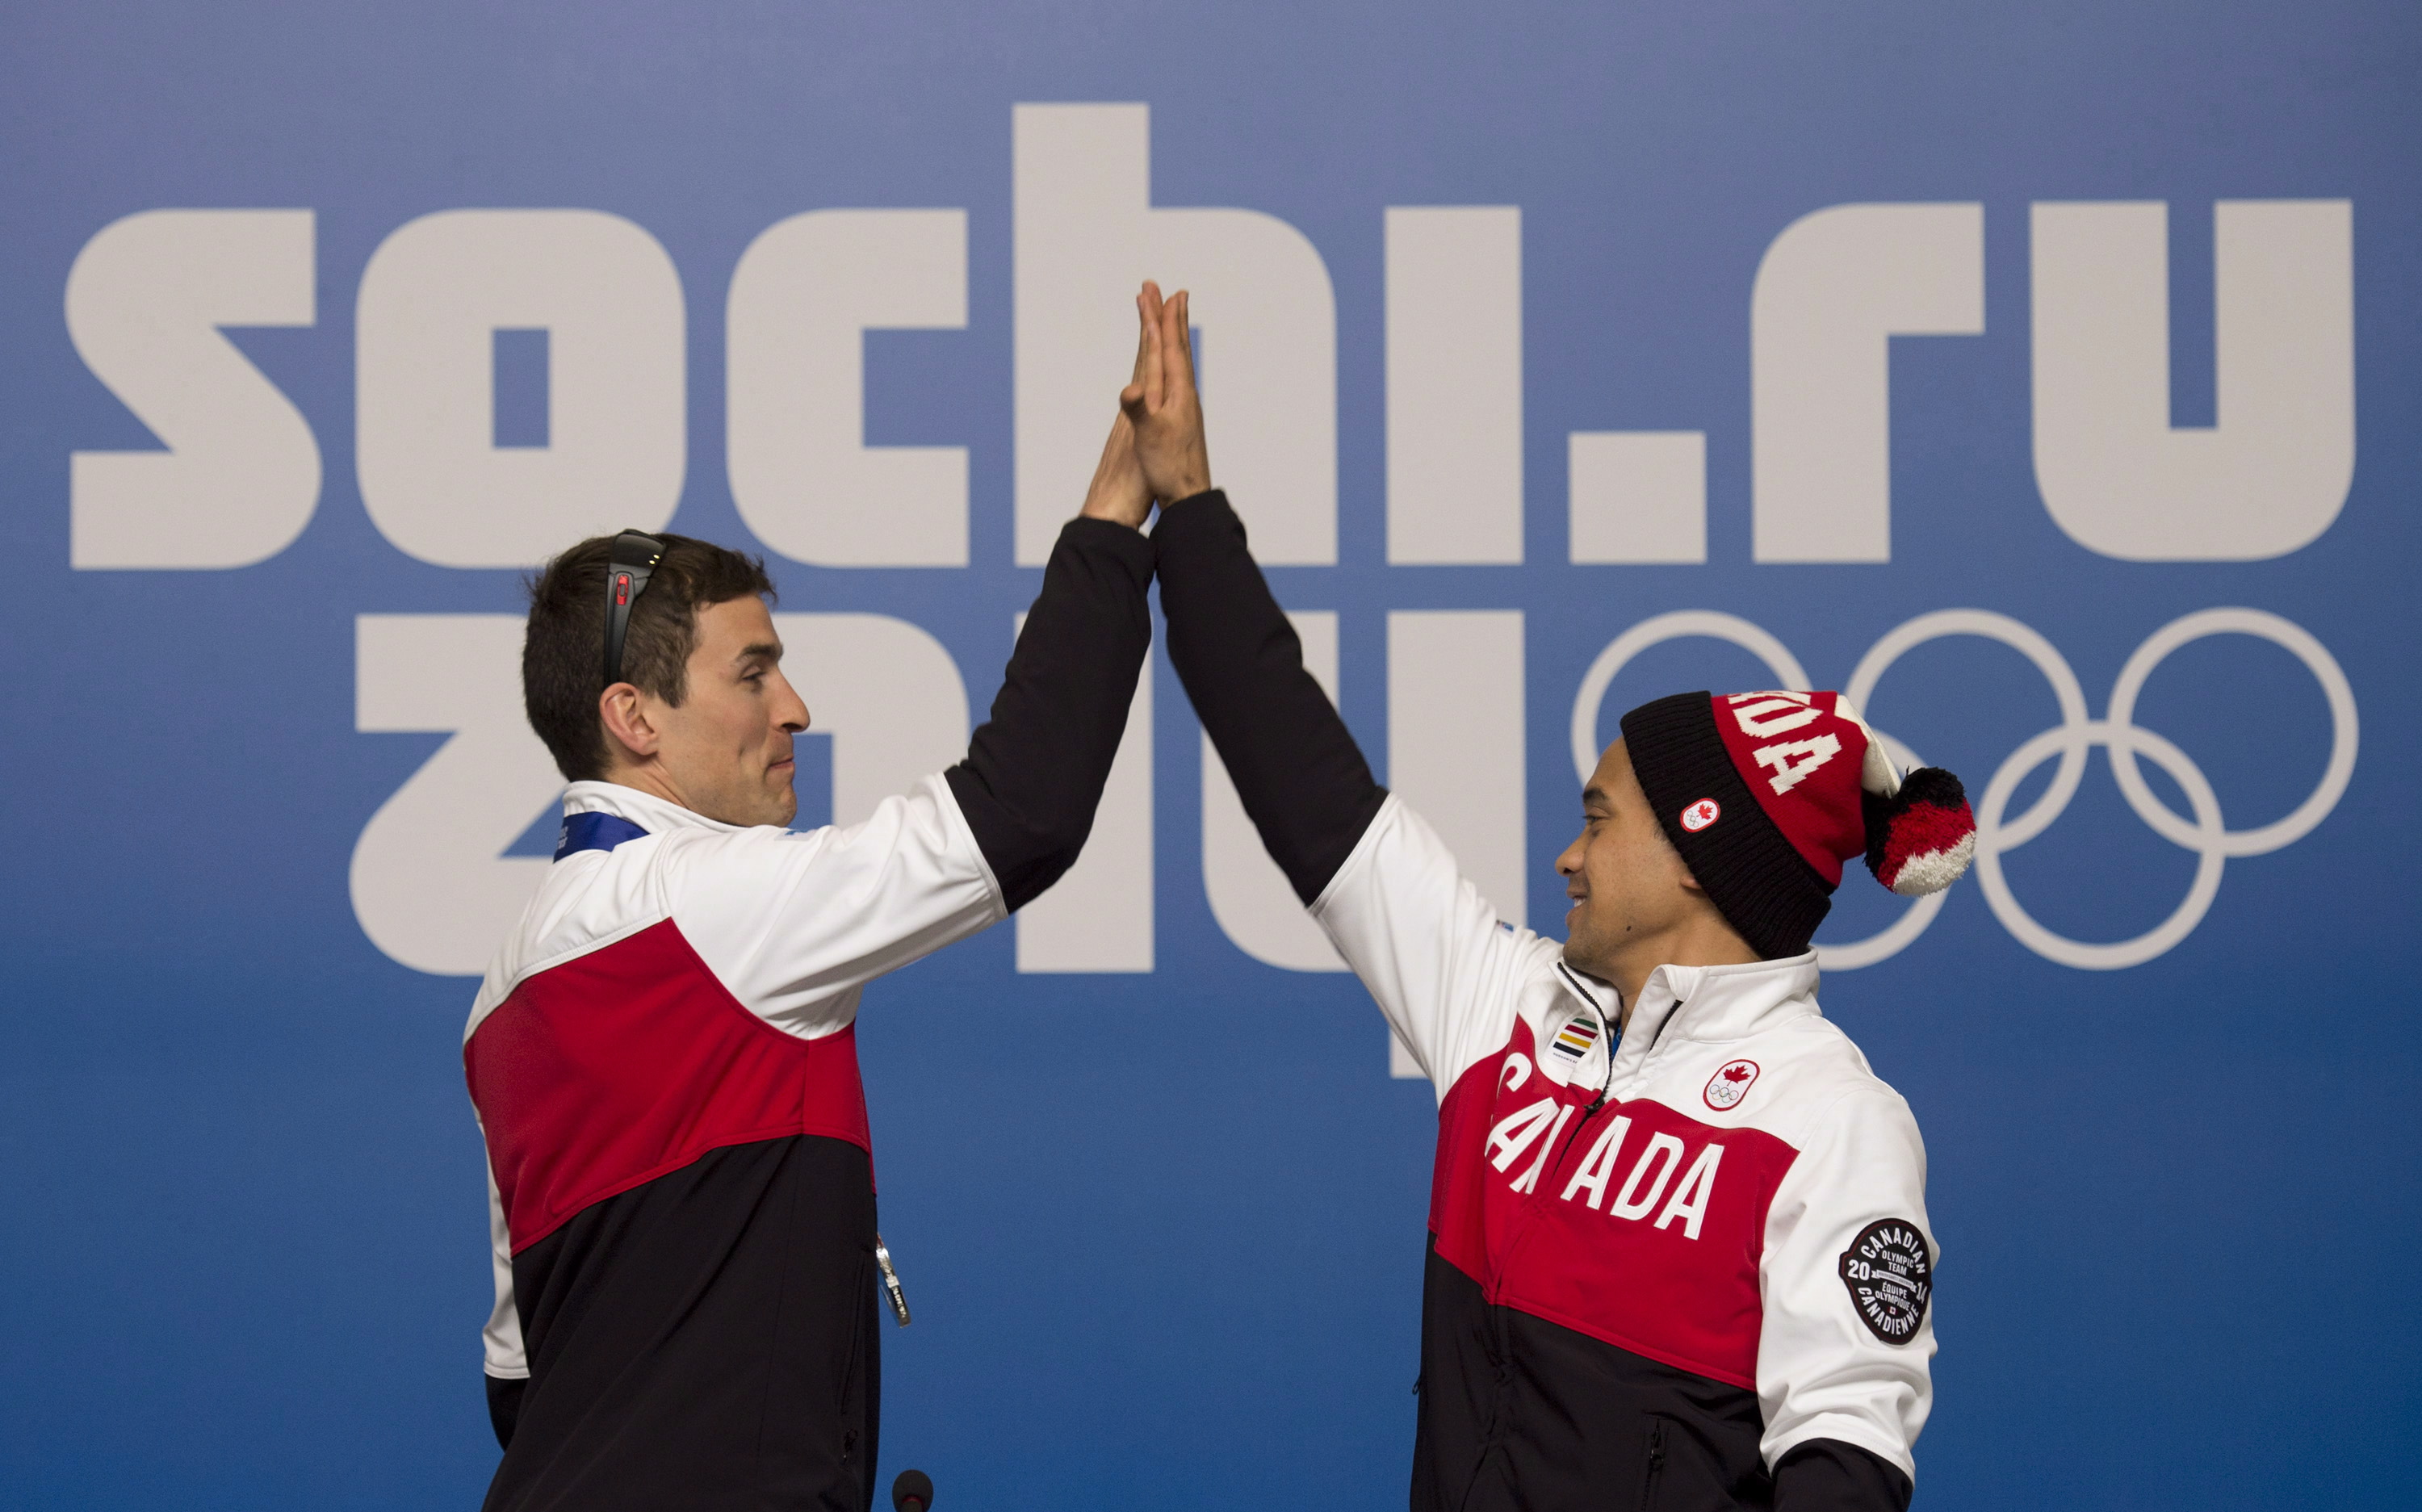 Canadian speed skaters Denny Morrison and Gilmore Junio perform their signature move following a a news conference at the Sochi Winter Olympics Sunday February 16, 2014 in Sochi, Russia. THE CANADIAN PRESS/Adrian Wyld